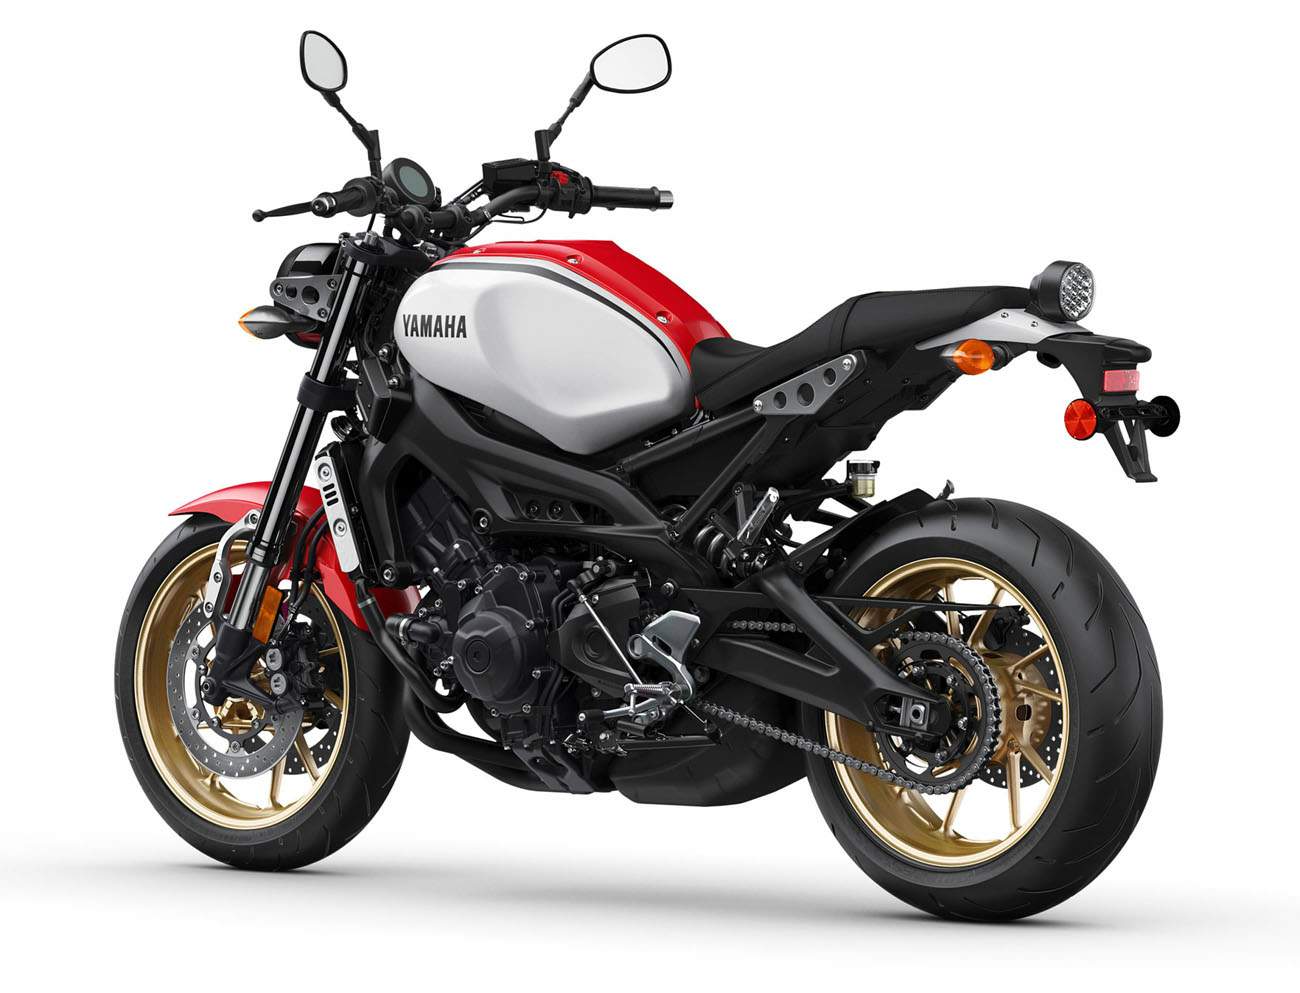 Yamaha XSR 900 (2020) technical specifications